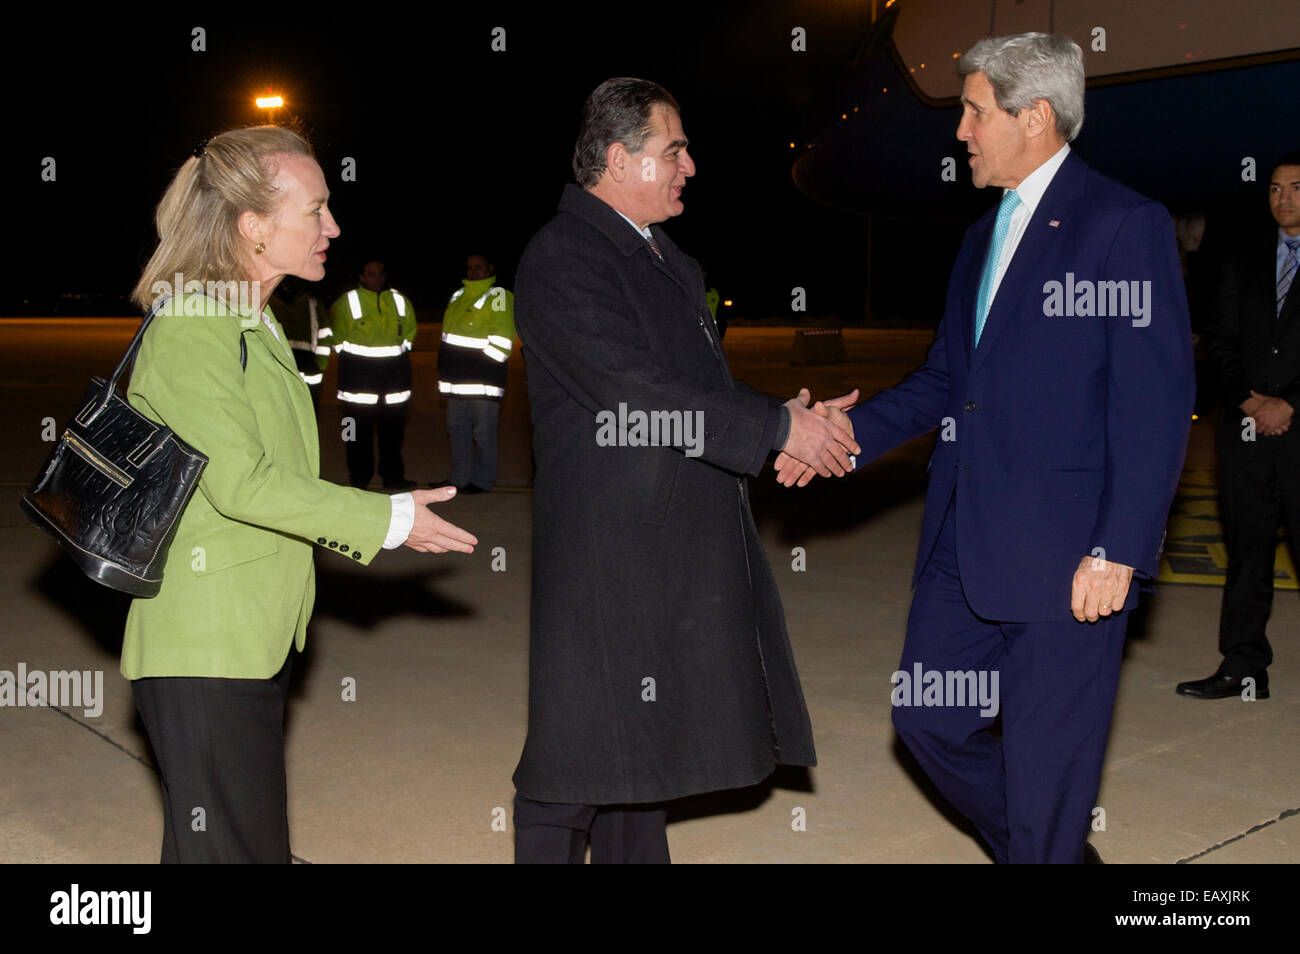 U.S. Ambassador to Jordan Alice Wells and Jordanian Ministry of Foreign Affairs Ambassador Ibrahim Awawdeh welcome U.S. Secretary of State John Kerry to Amman, Jordan, in the predawn hours of November 13, 2014, before a series of meetings with Jordanian F Stock Photo